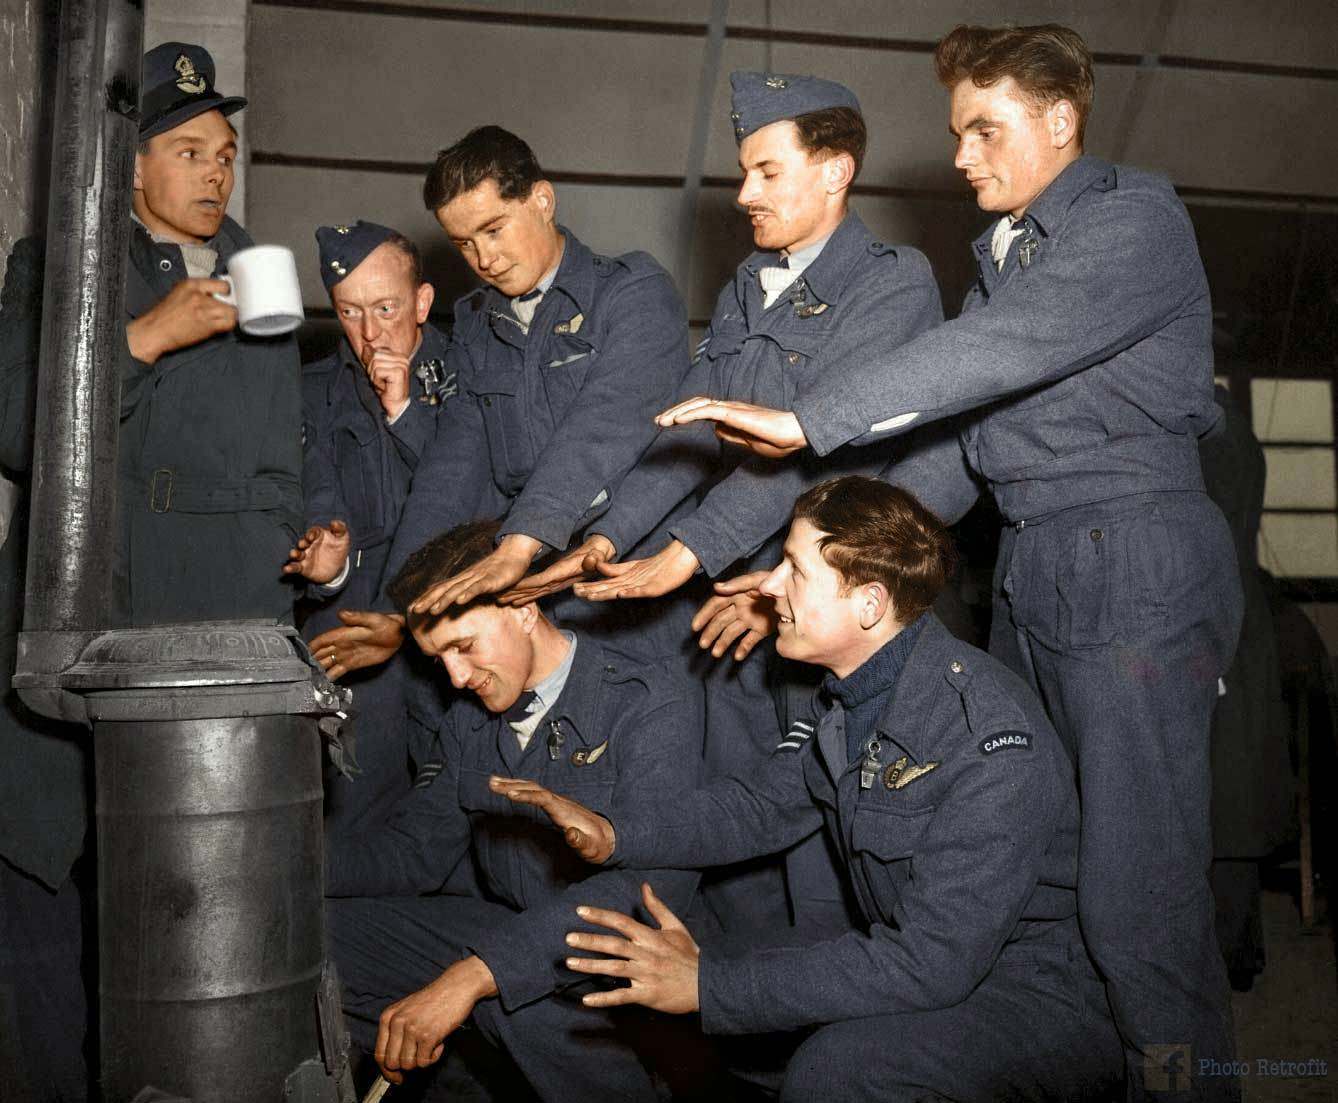 The crew of Avro Lancaster "C for Charlie" of No. 44 (Rhodesia) Squadron RAF, try to warm themselves in their Nissen hut quarters at Dunholme Lodge, Lincolnshire, England, after returning from a raid on Stuttgart, 2nd of March 1944